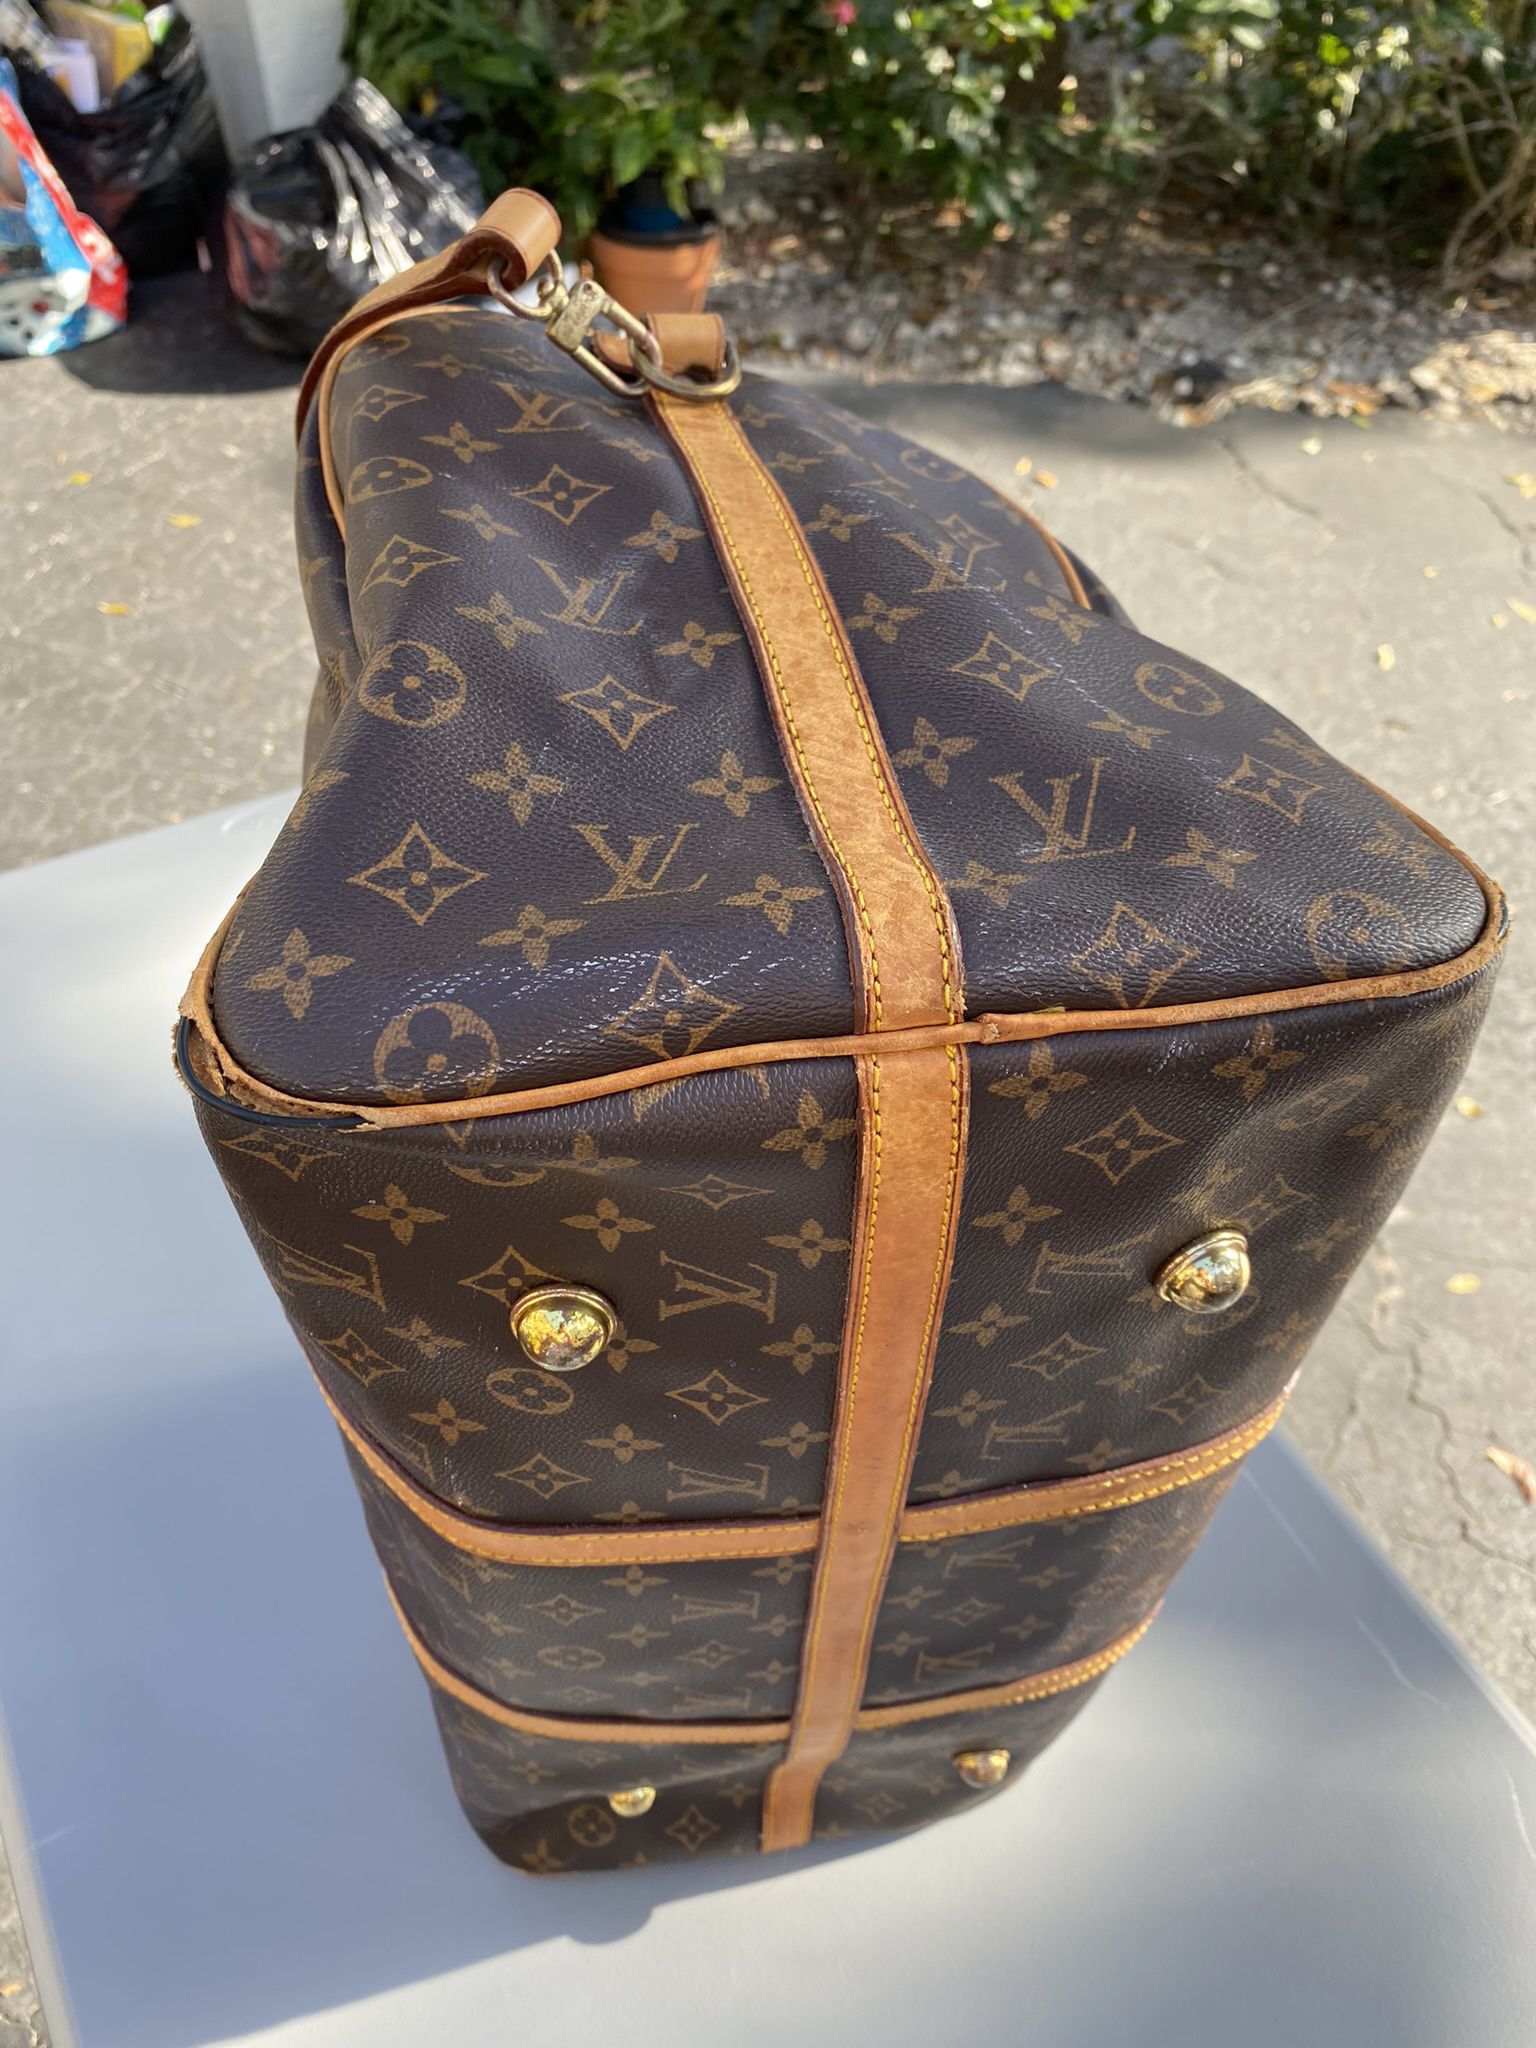 Authentic Louis Vuitton Duffle Bag for Sale in Fort Lauderdale, FL - OfferUp